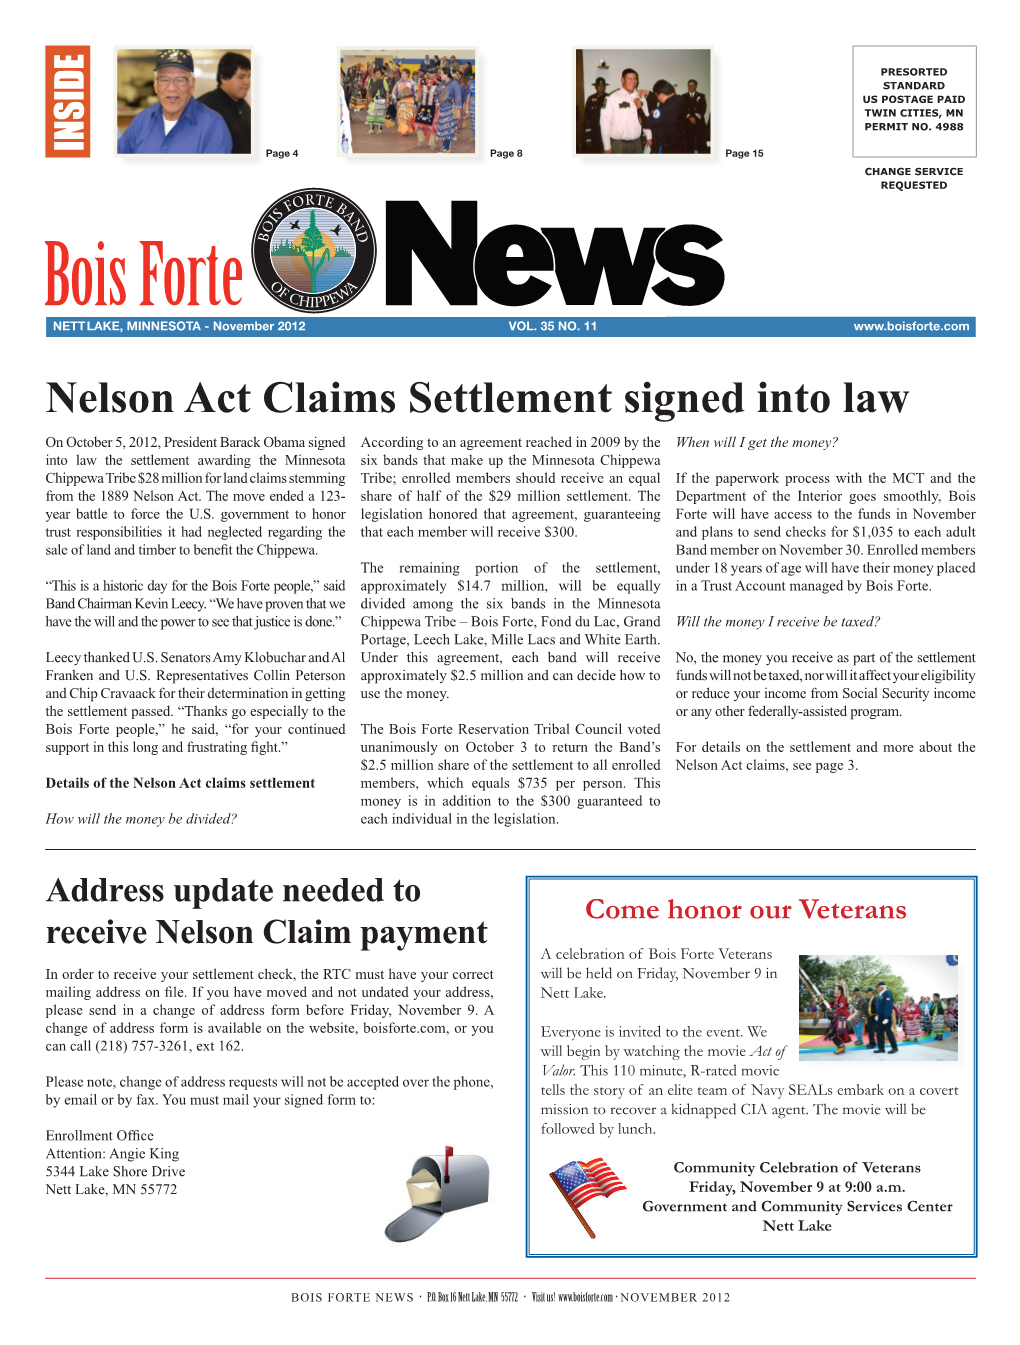 Nelson Act Claims Settlement Signed Into